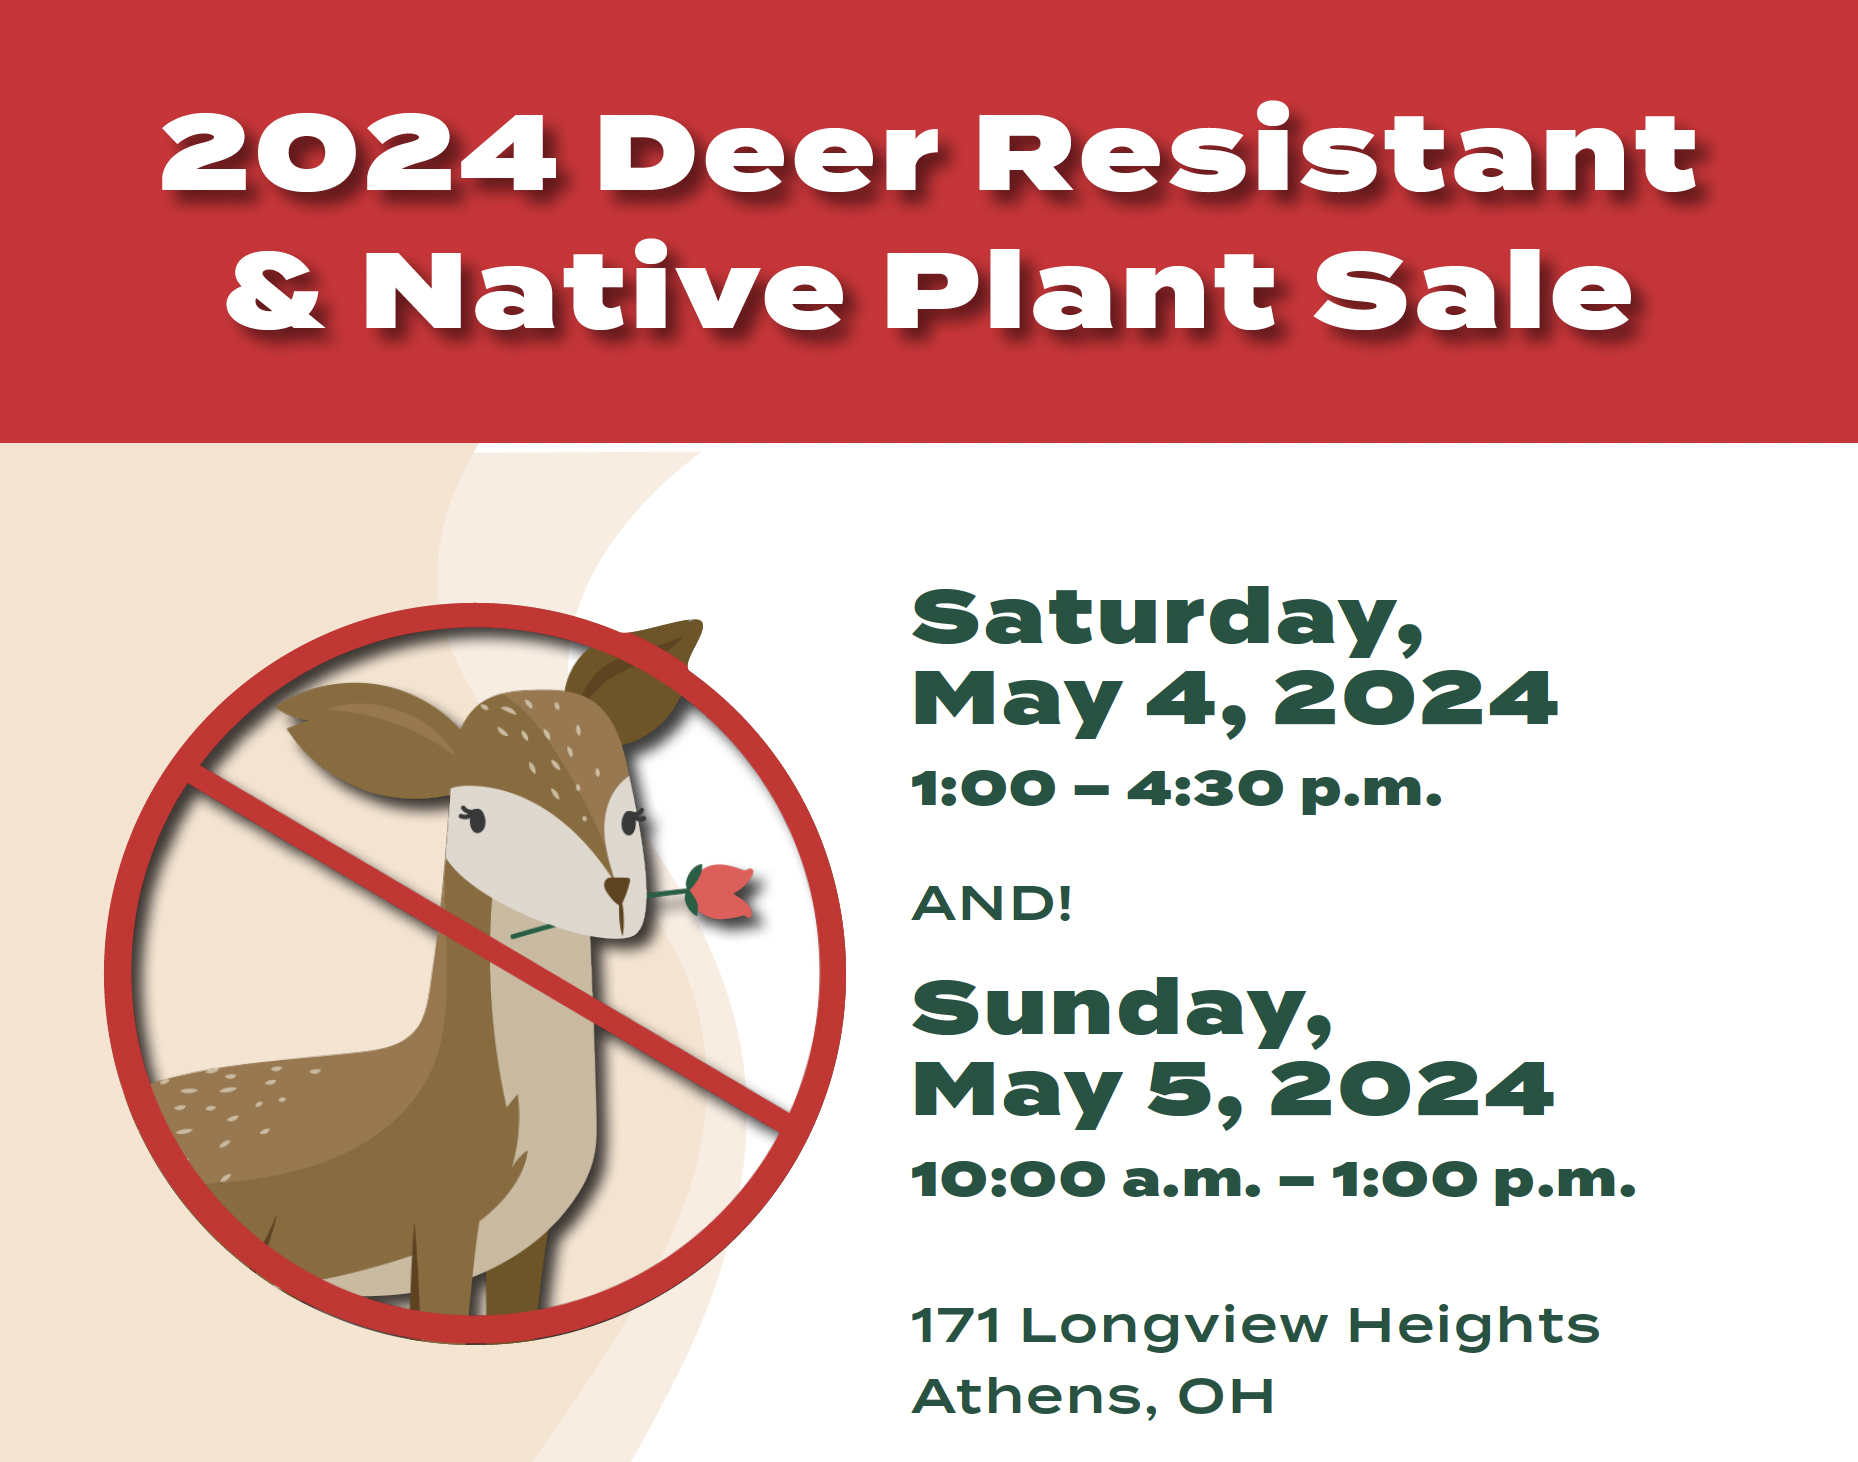 An image advertising the 2024 Deer Resistant & Native Plant Sale.